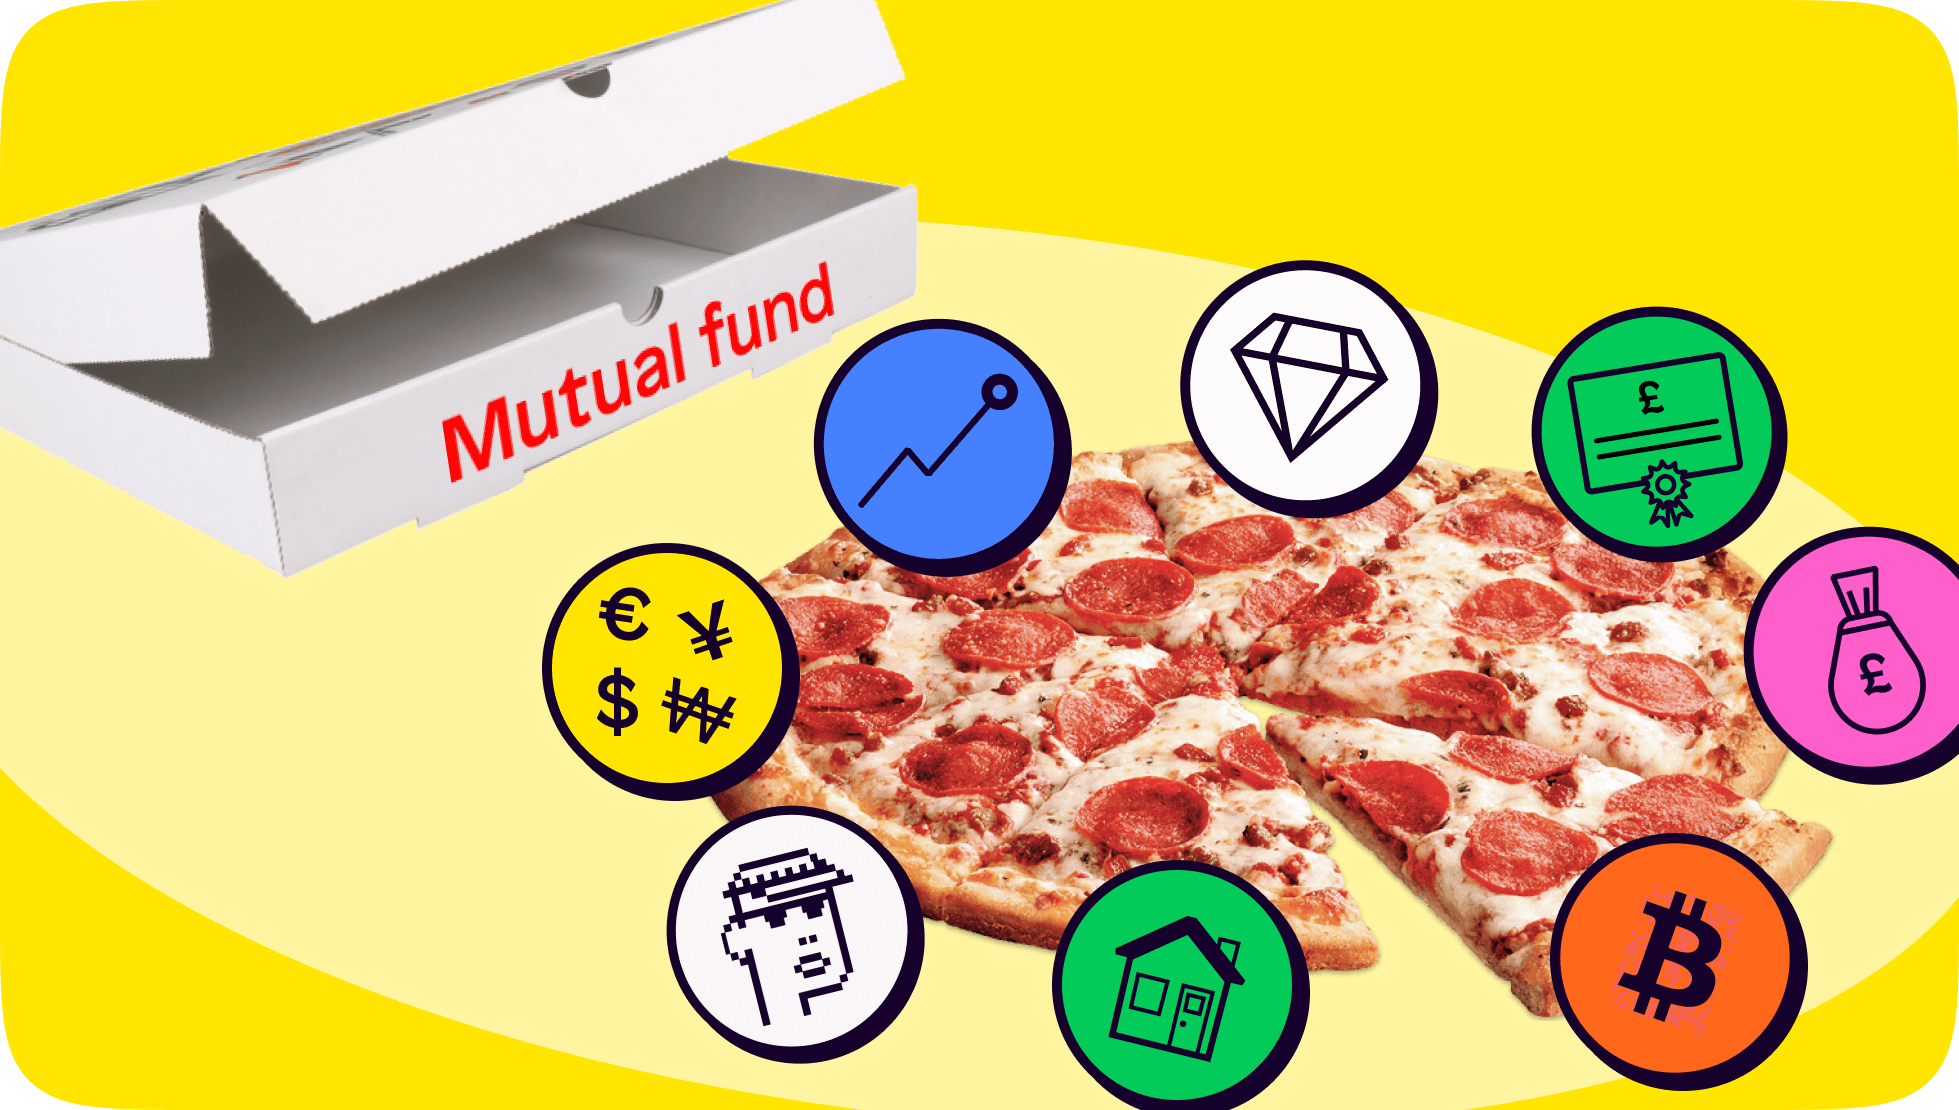 An example of a mutual fund, using a pizza